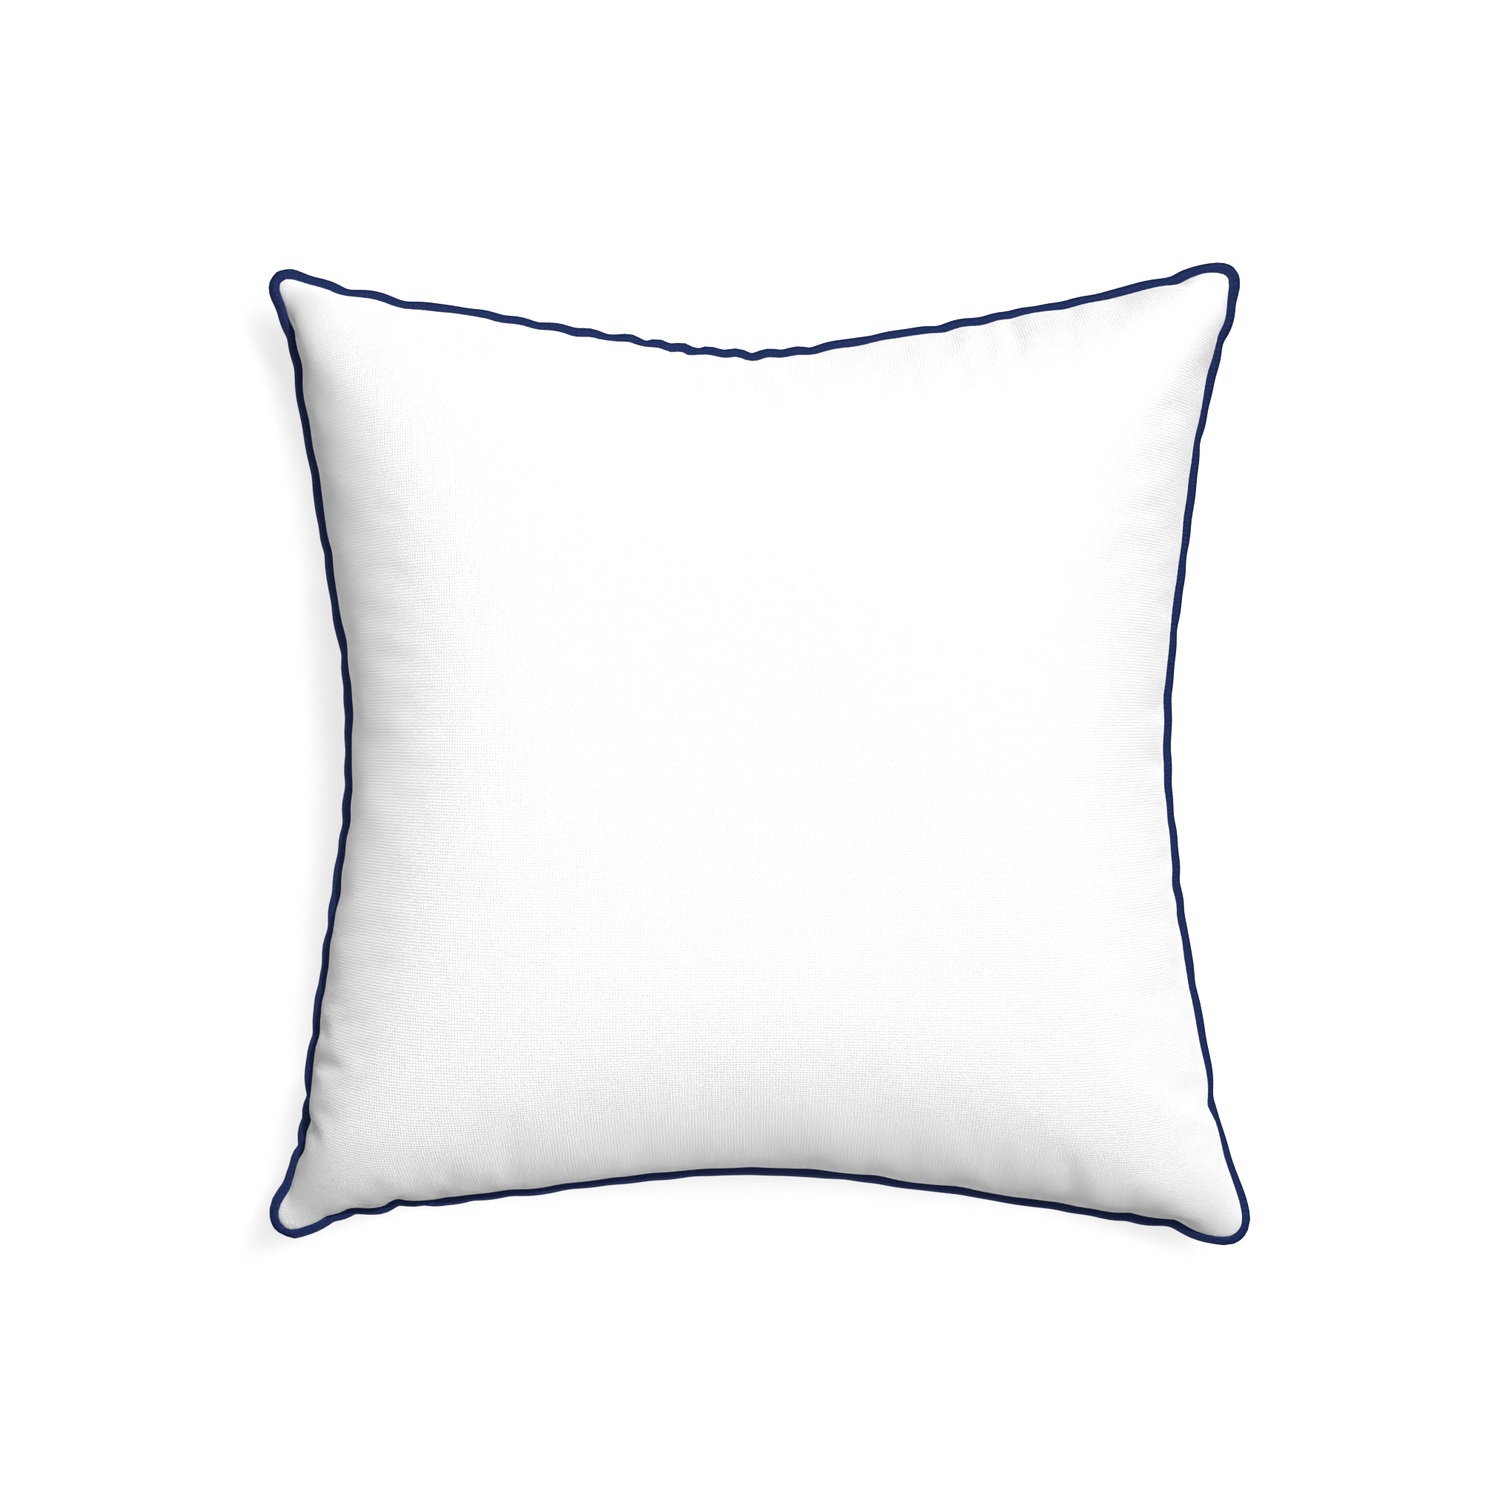 22-square snow custom pillow with midnight piping on white background